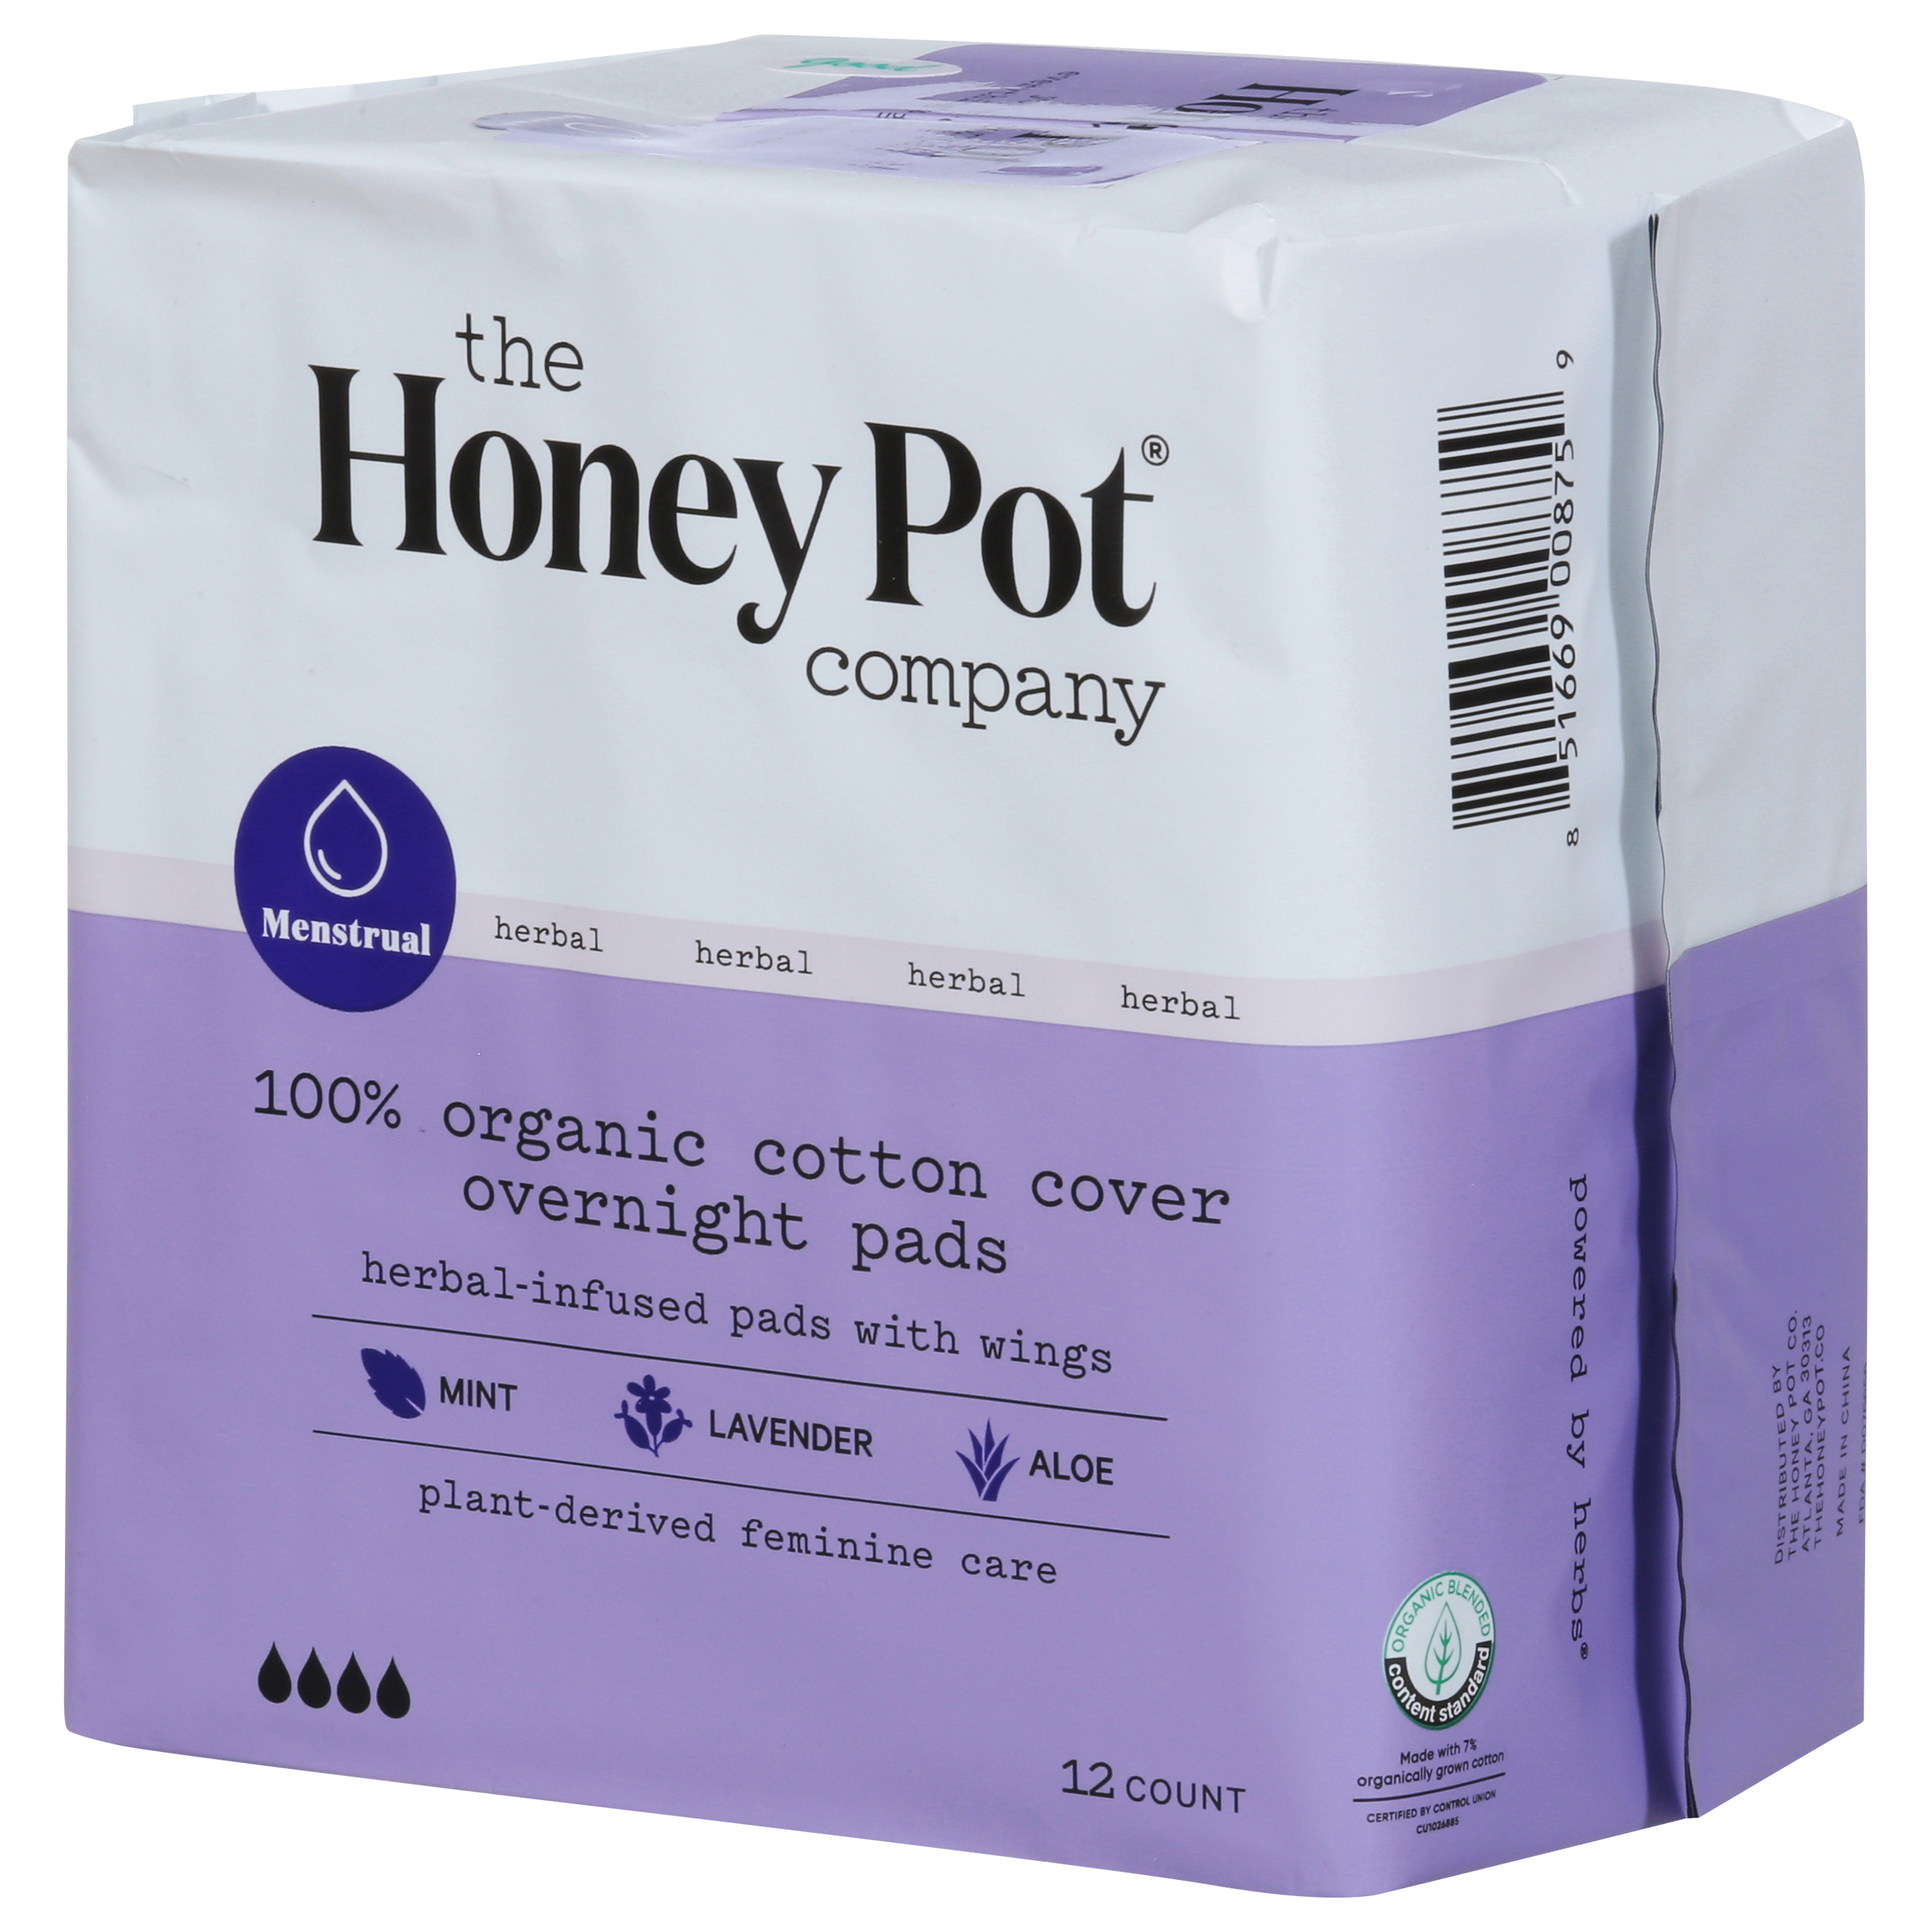 The Honey Pot Pads, Organic, Overnight, with Wings, Herbal-Infused - 12 pads